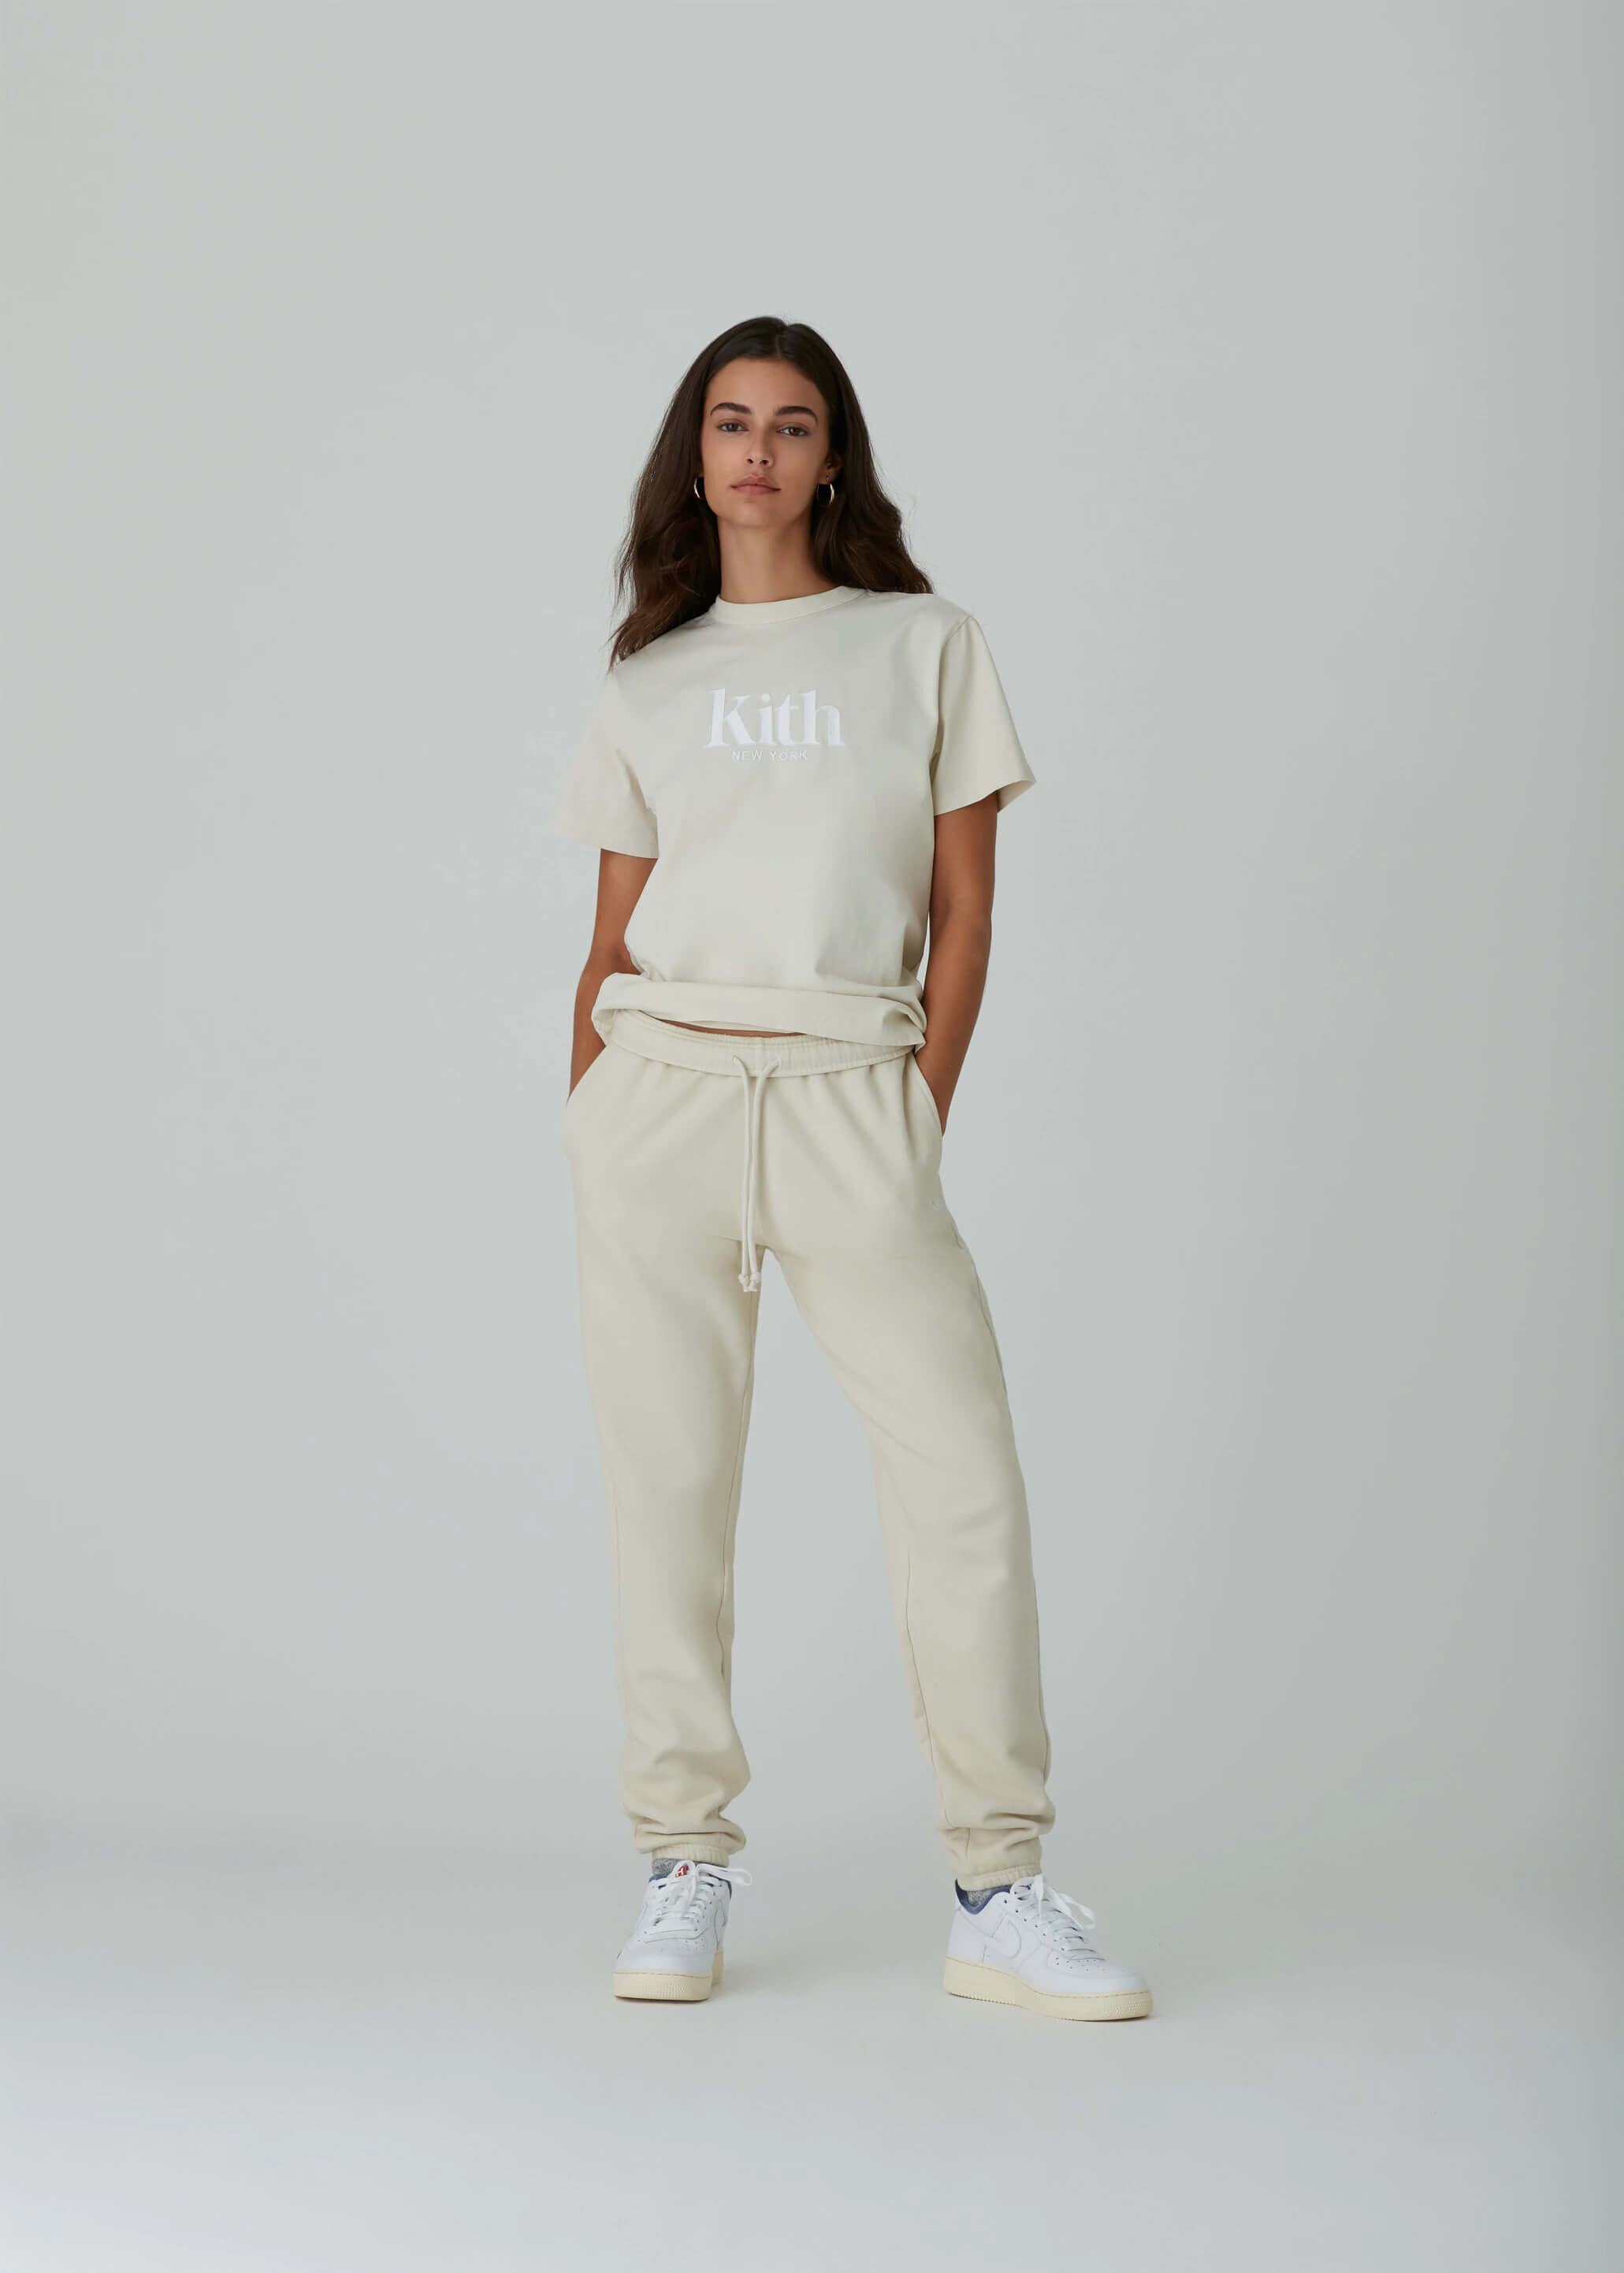 CNK-Kith-Spring-1-2021-Collection-Look-27.jpeg